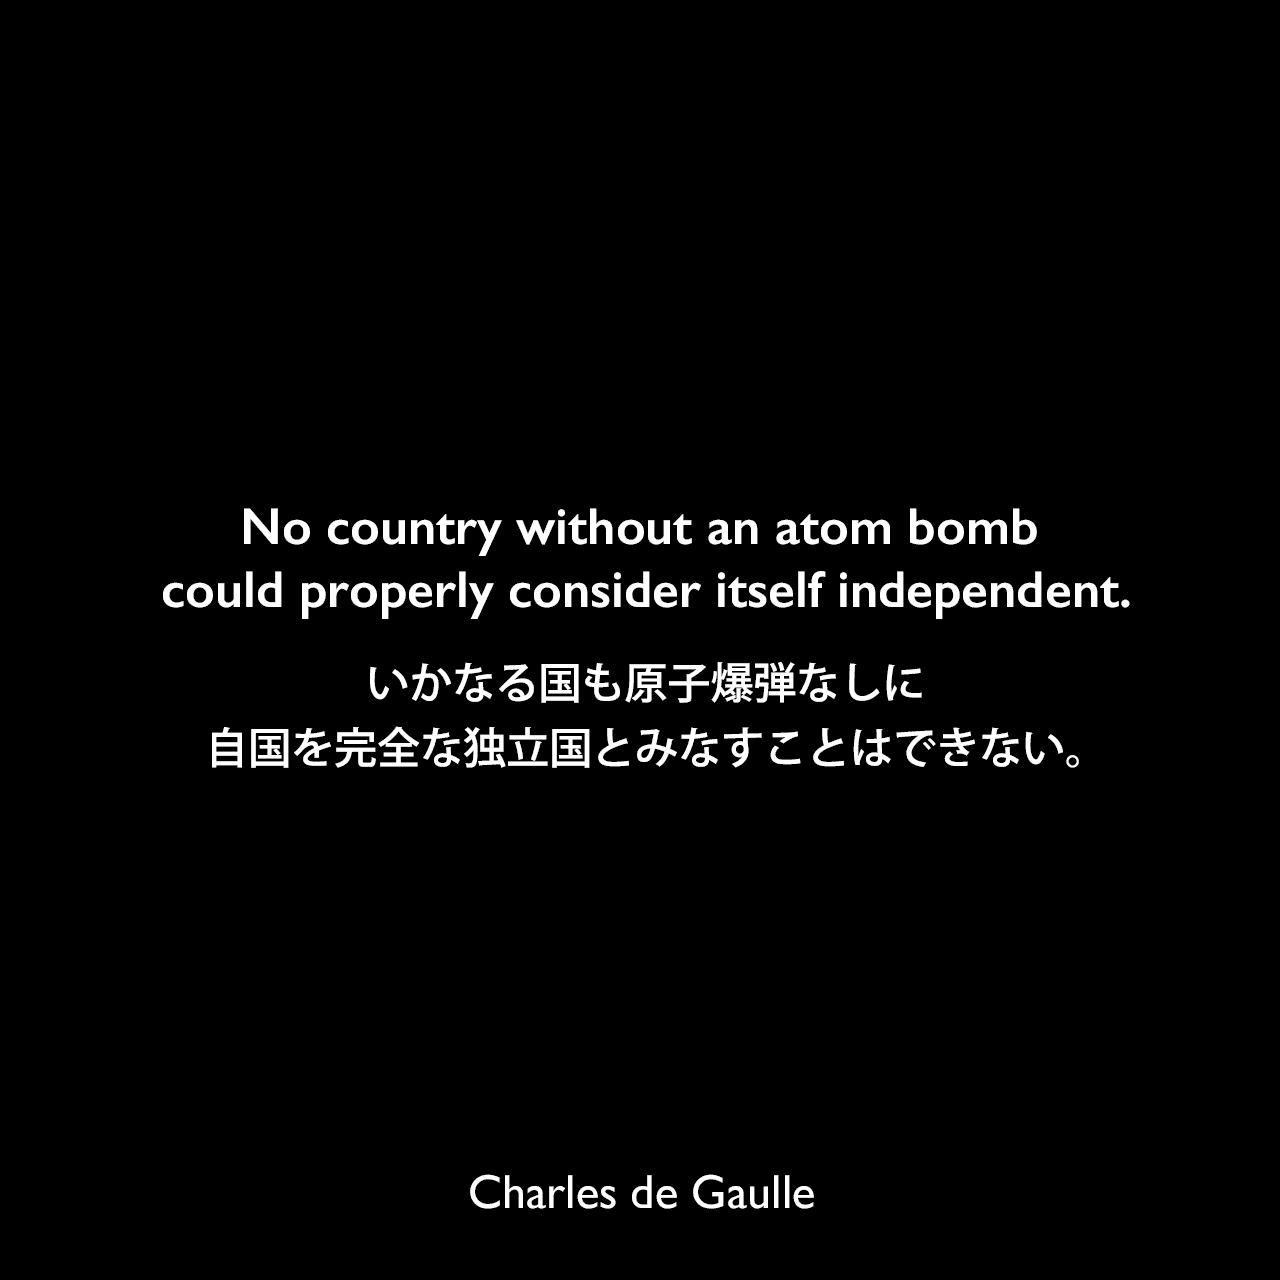 No country without an atom bomb could properly consider itself independent.いかなる国も原子爆弾なしに自国を完全な独立国とみなすことはできない。Charles de Gaulle